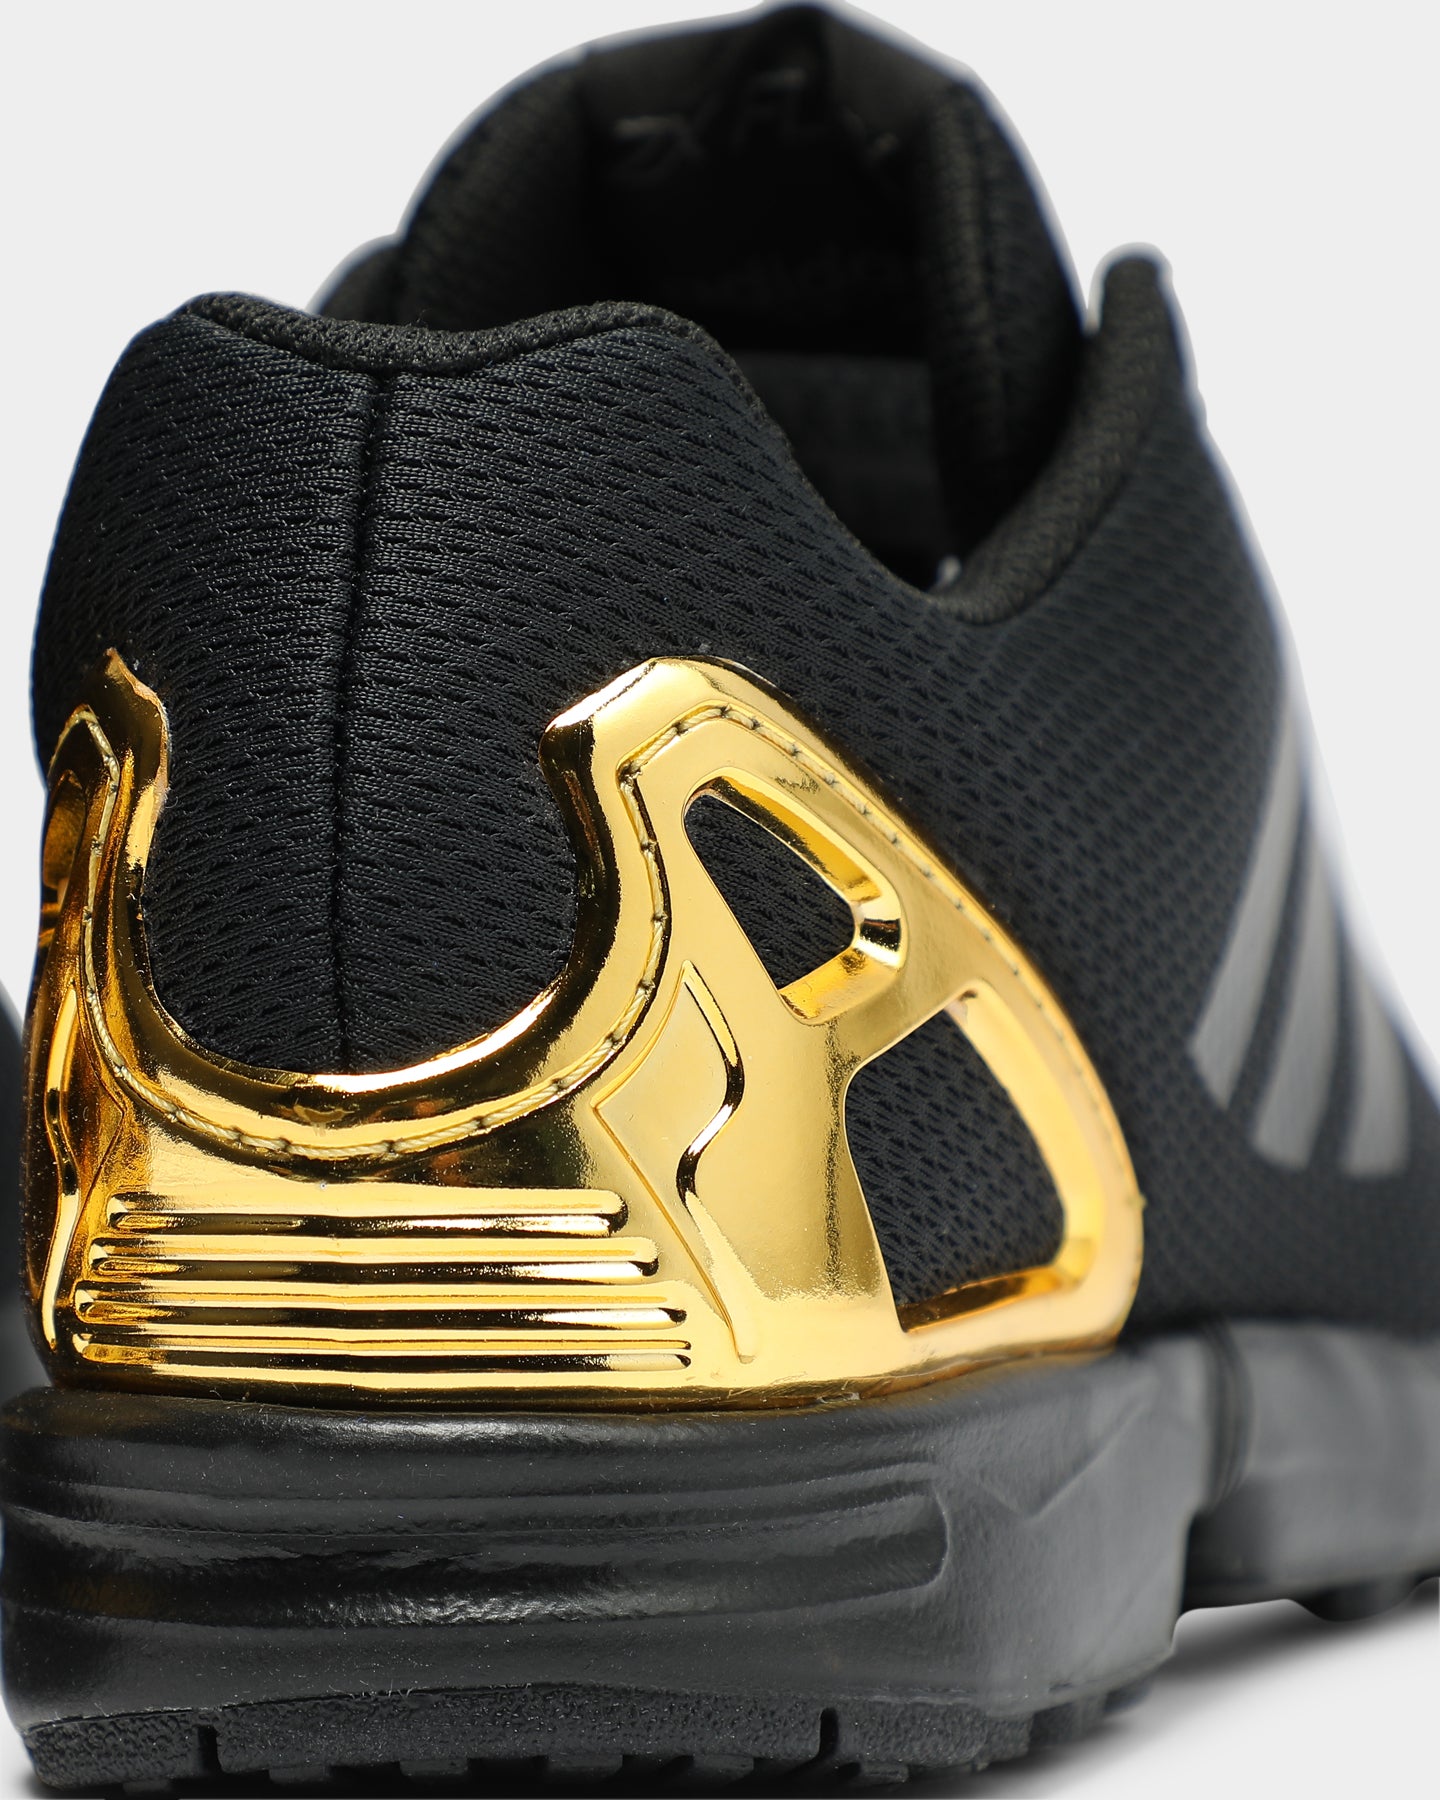 adidas flux black and gold